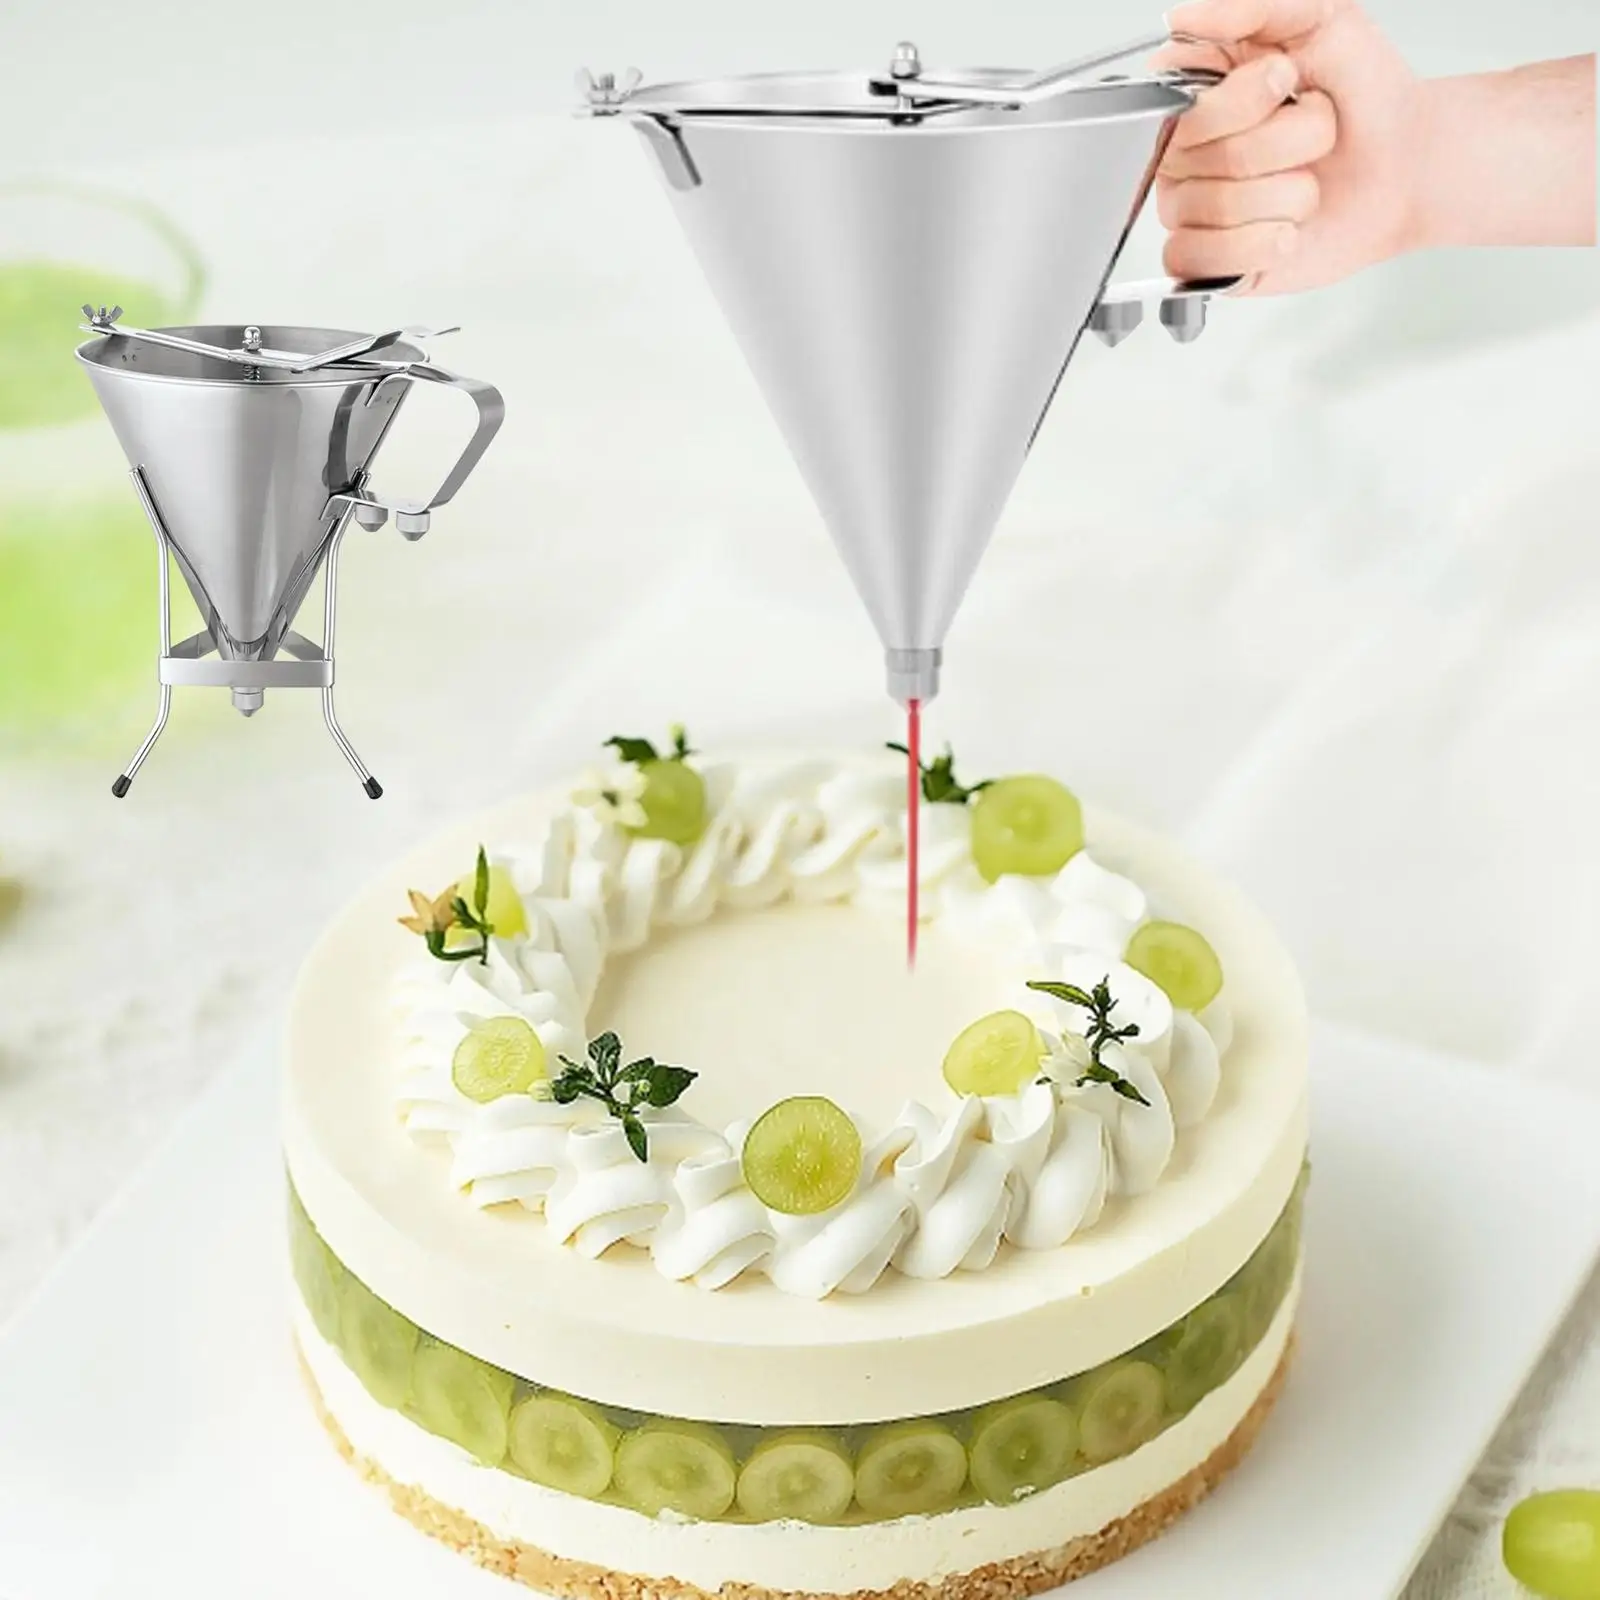 Stainless Steel Funnel Balls Tools with Handle Pancake Batter Dispenser Funnel with Rack for Bakery Cake Decorating Octopus Ball